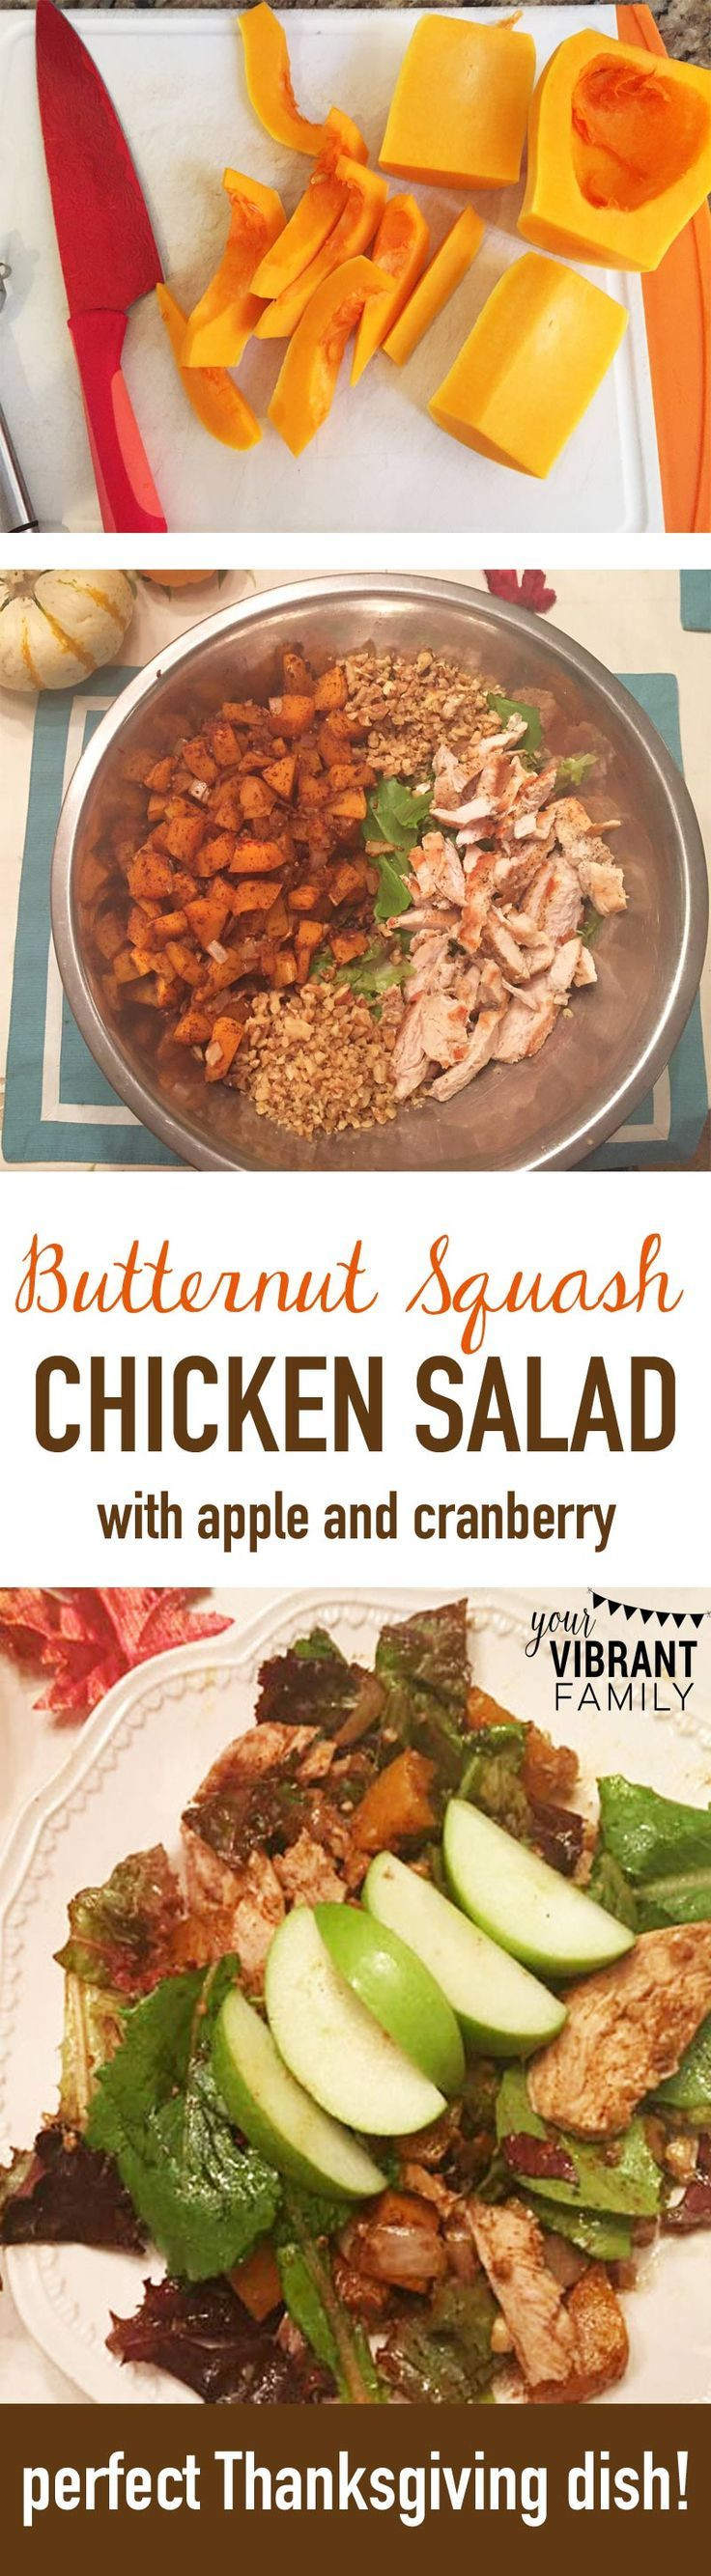 Awesome Thanksgiving Side Dishes
 17 Best images about butternut squash on Pinterest